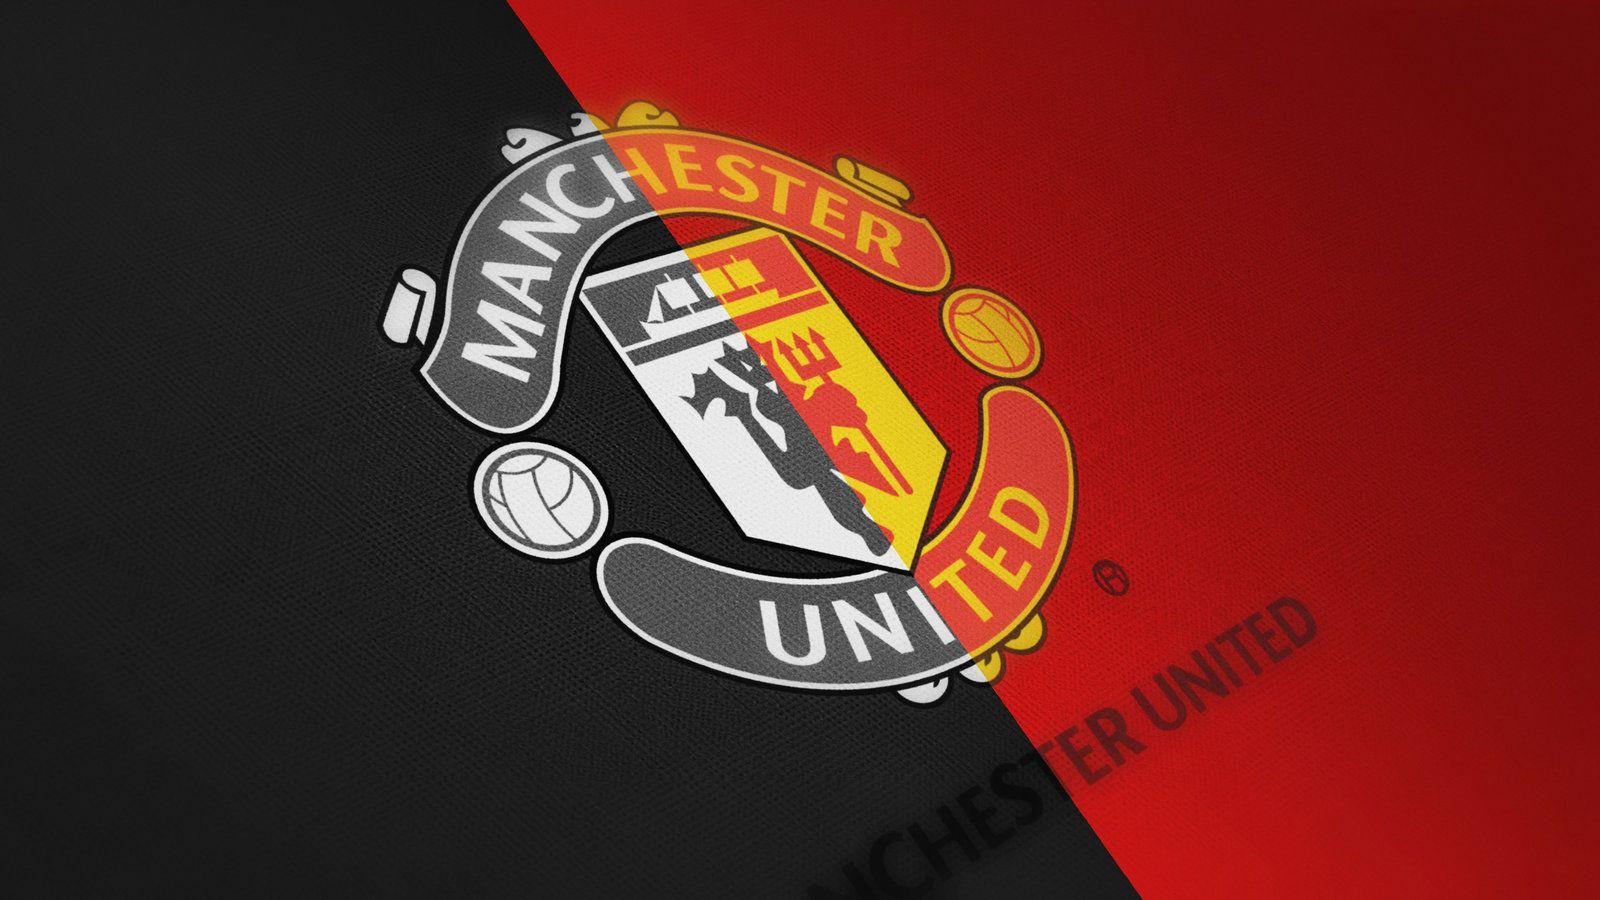 Manchester United Wallpapers Black - Wallpaper Cave